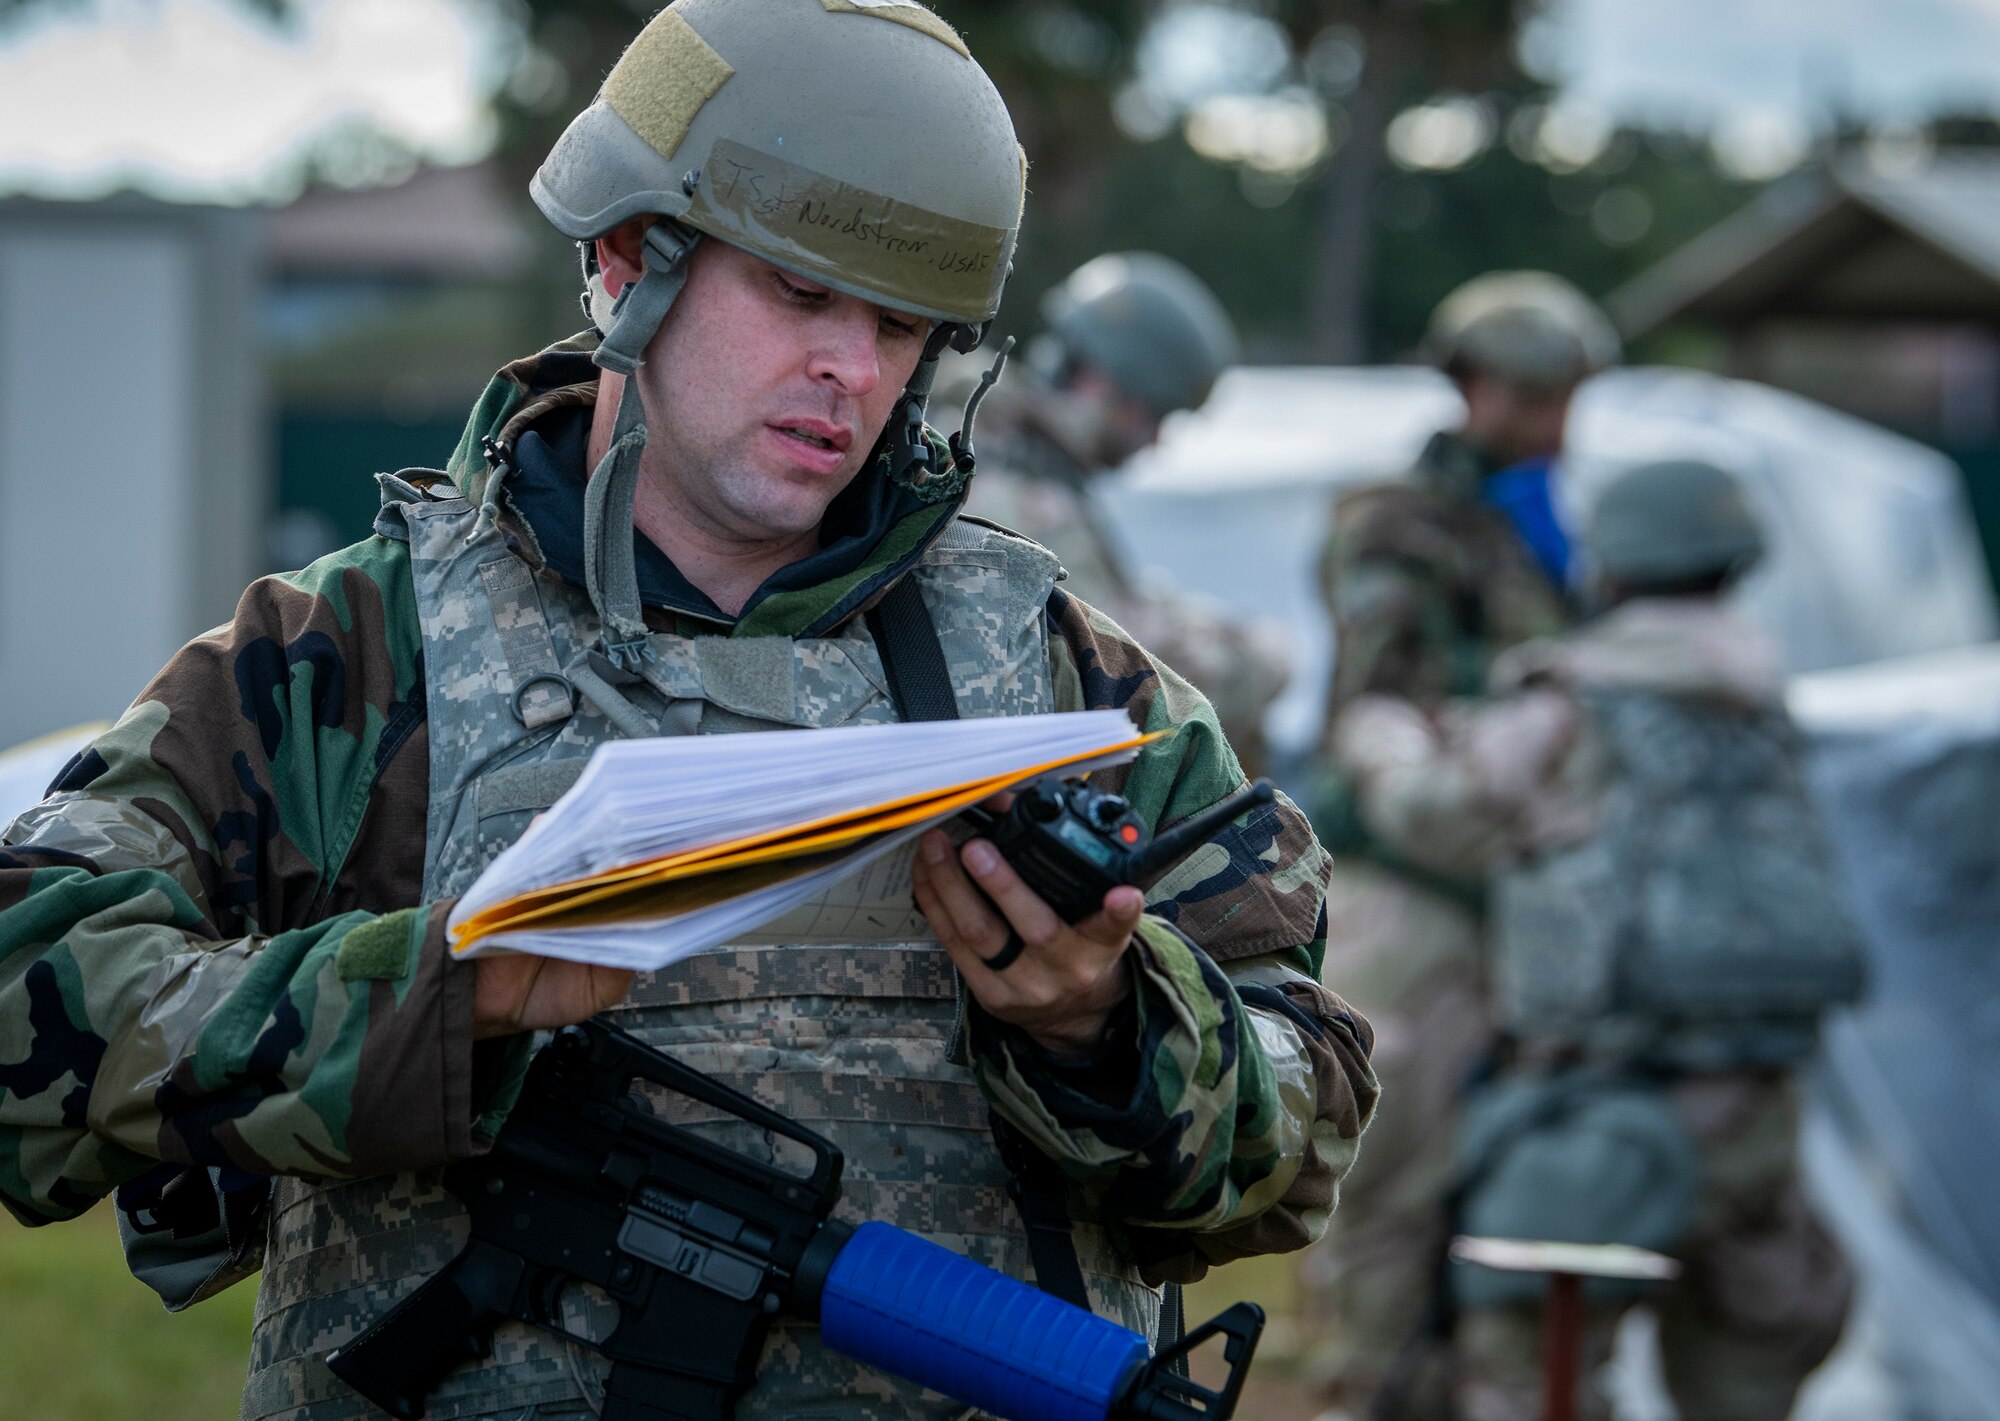 Deployment readiness exercise